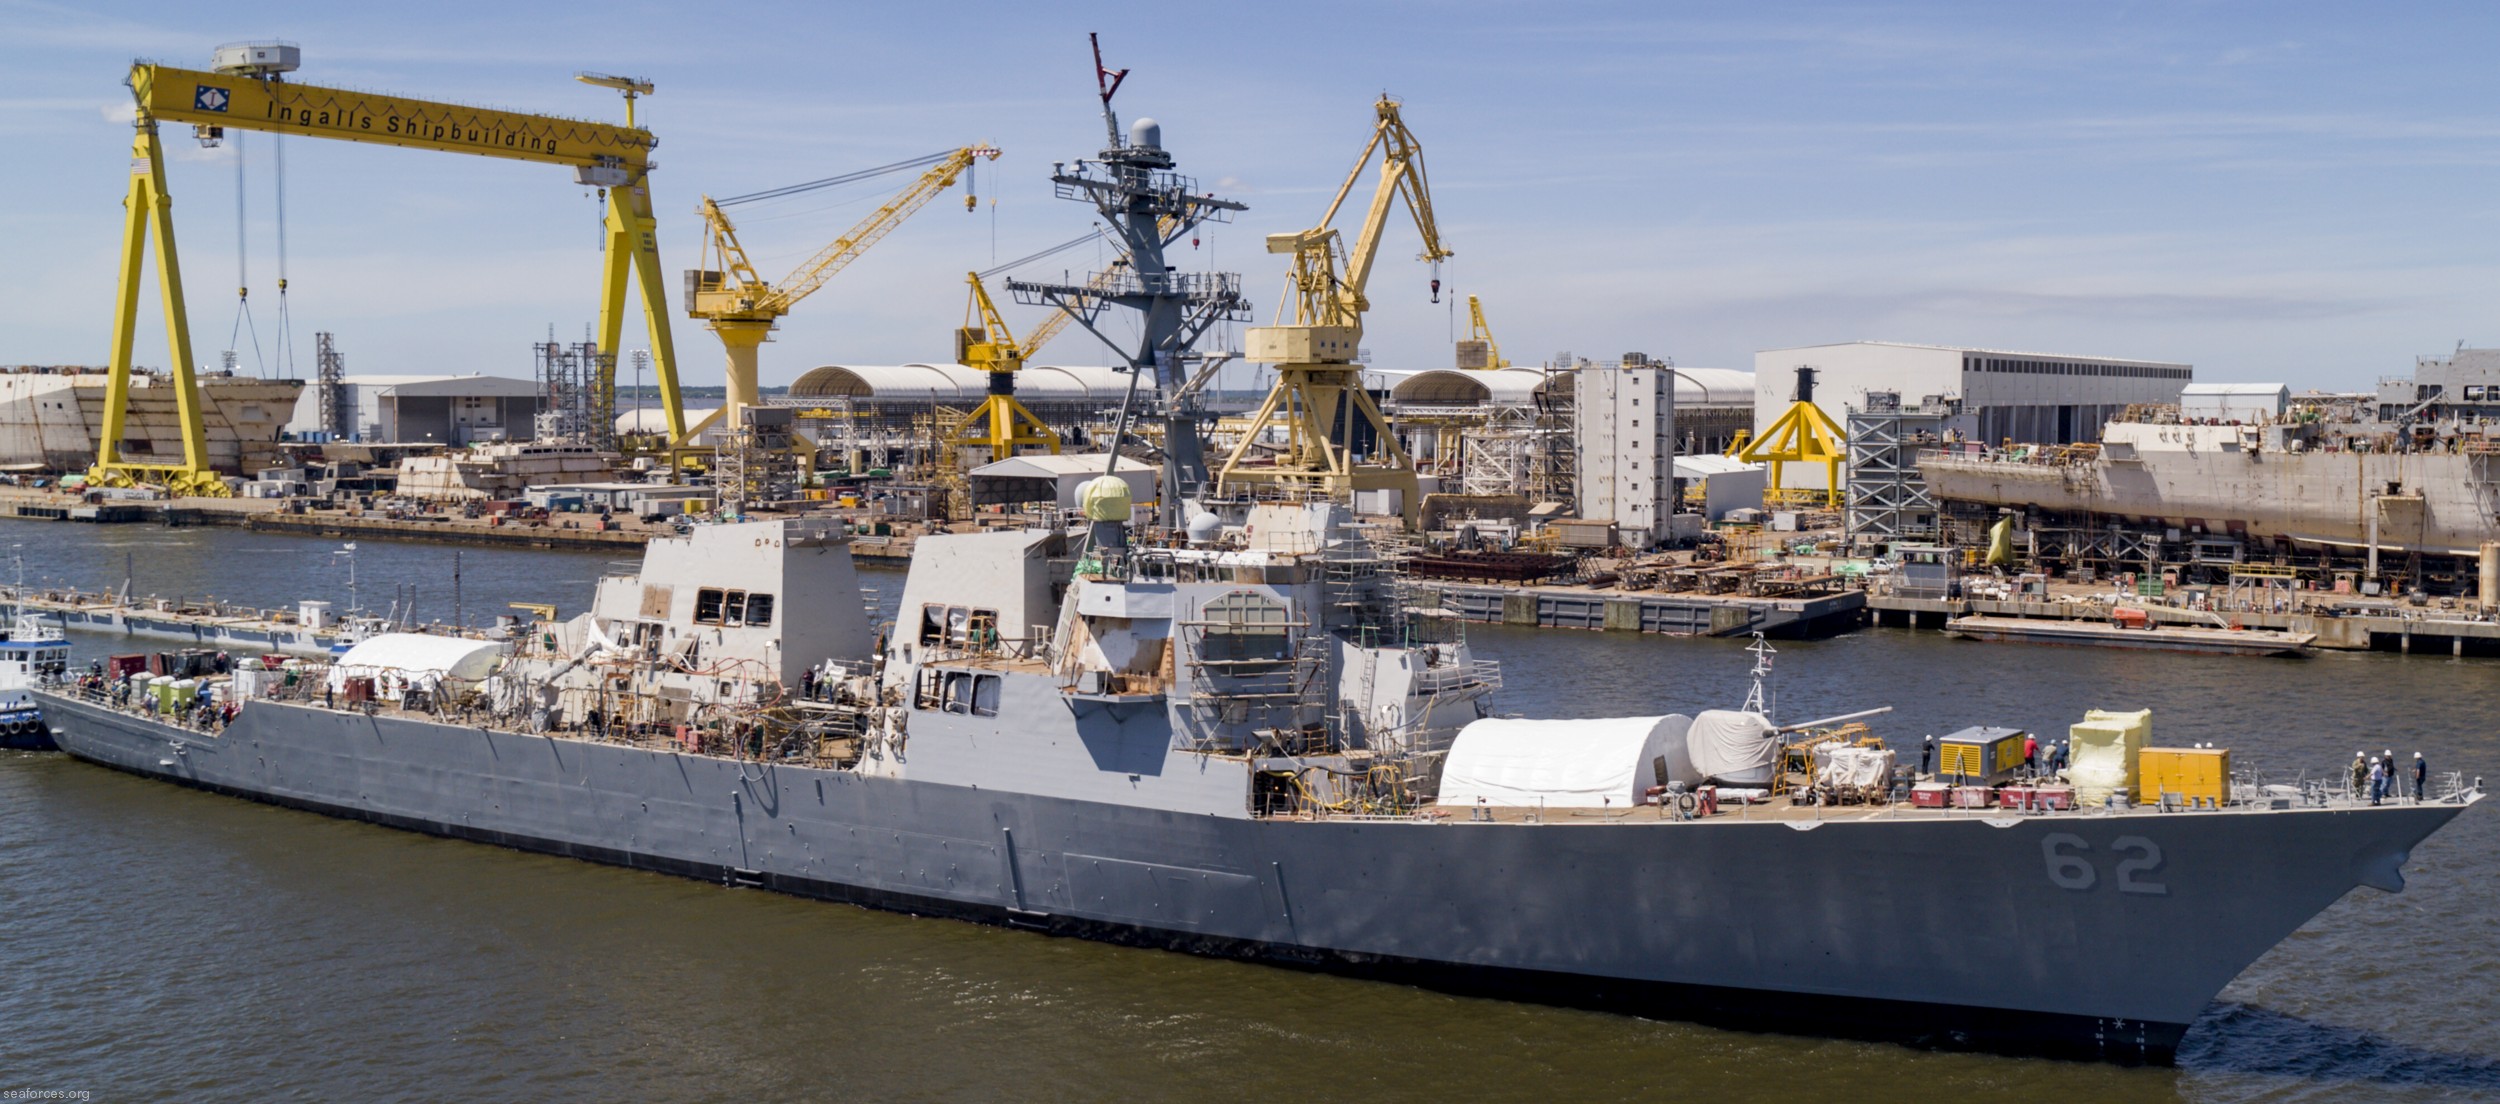 ddg-62 uss fitzgerald guided missile destroyer us navy 150 after repairs huntington ingalls pascagoula